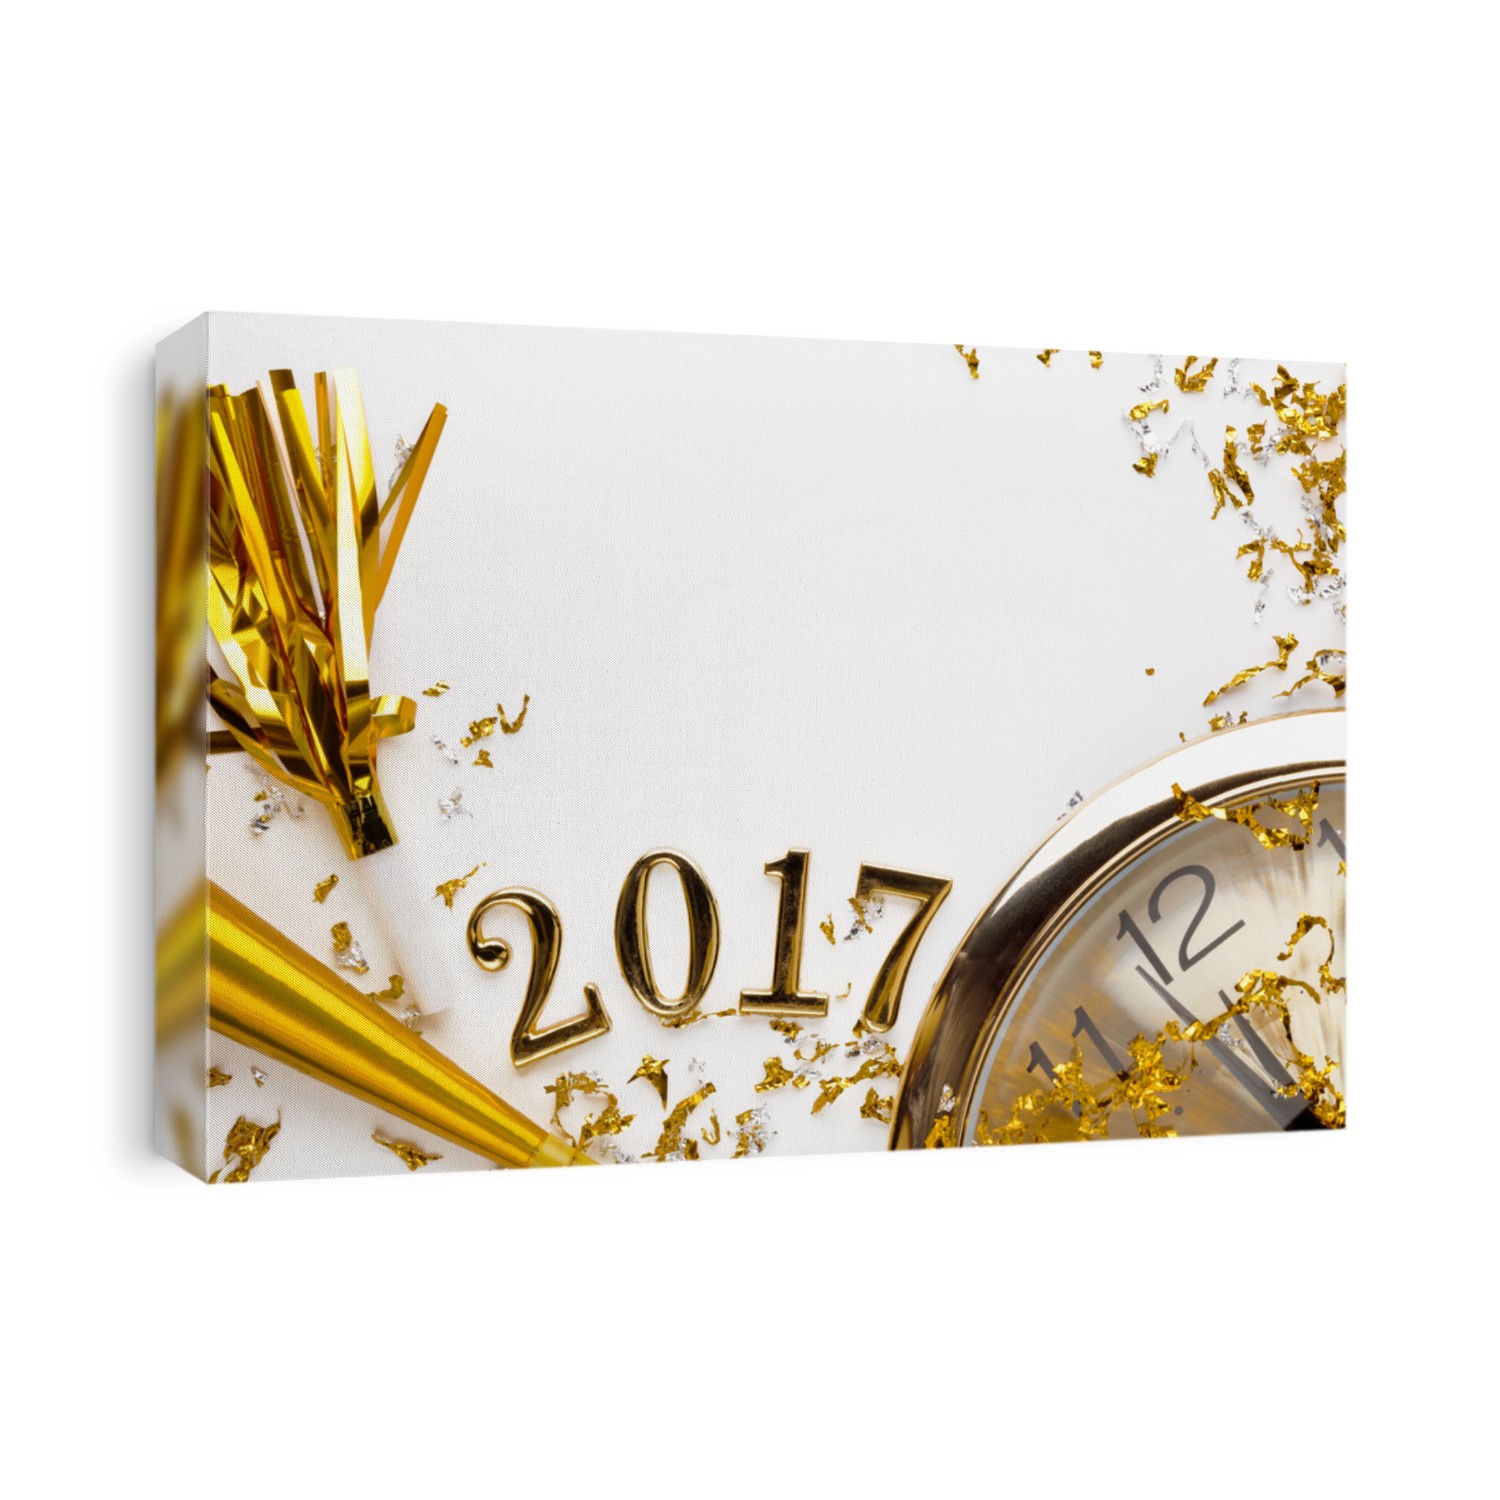  New Year 2017 Decoration on White